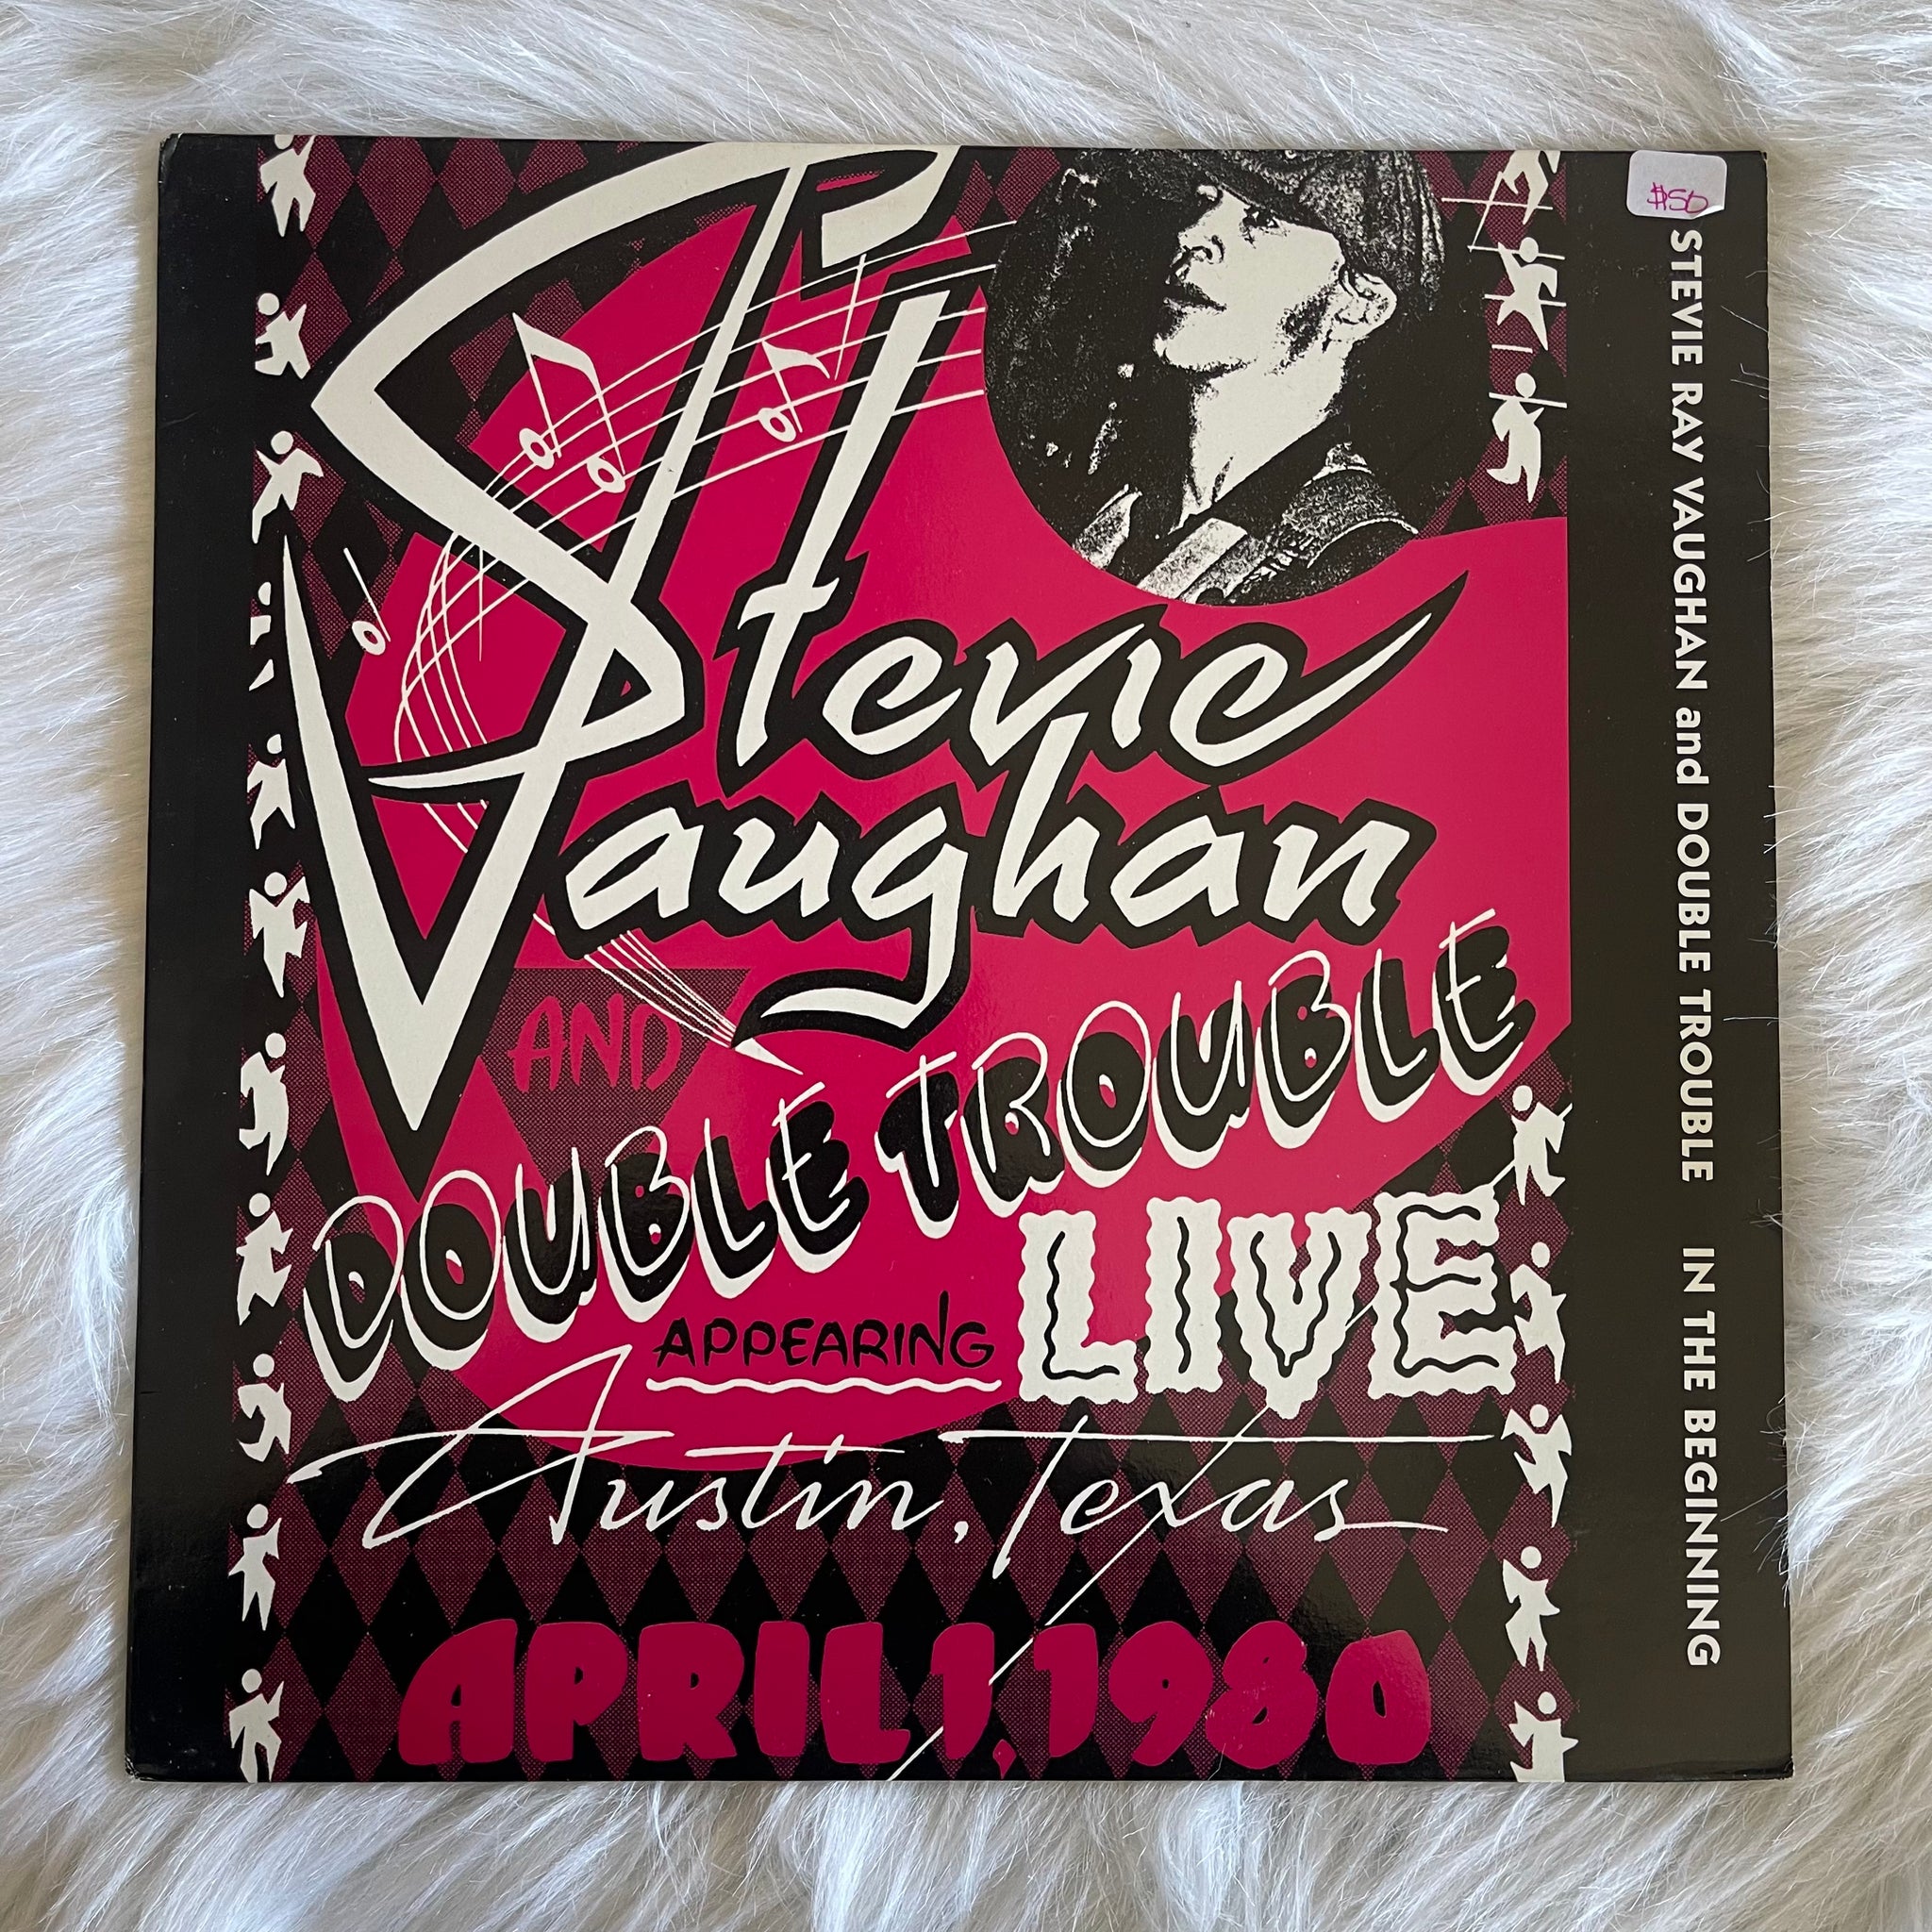 Stevie Ray Vaughan and Double Trouble-Live